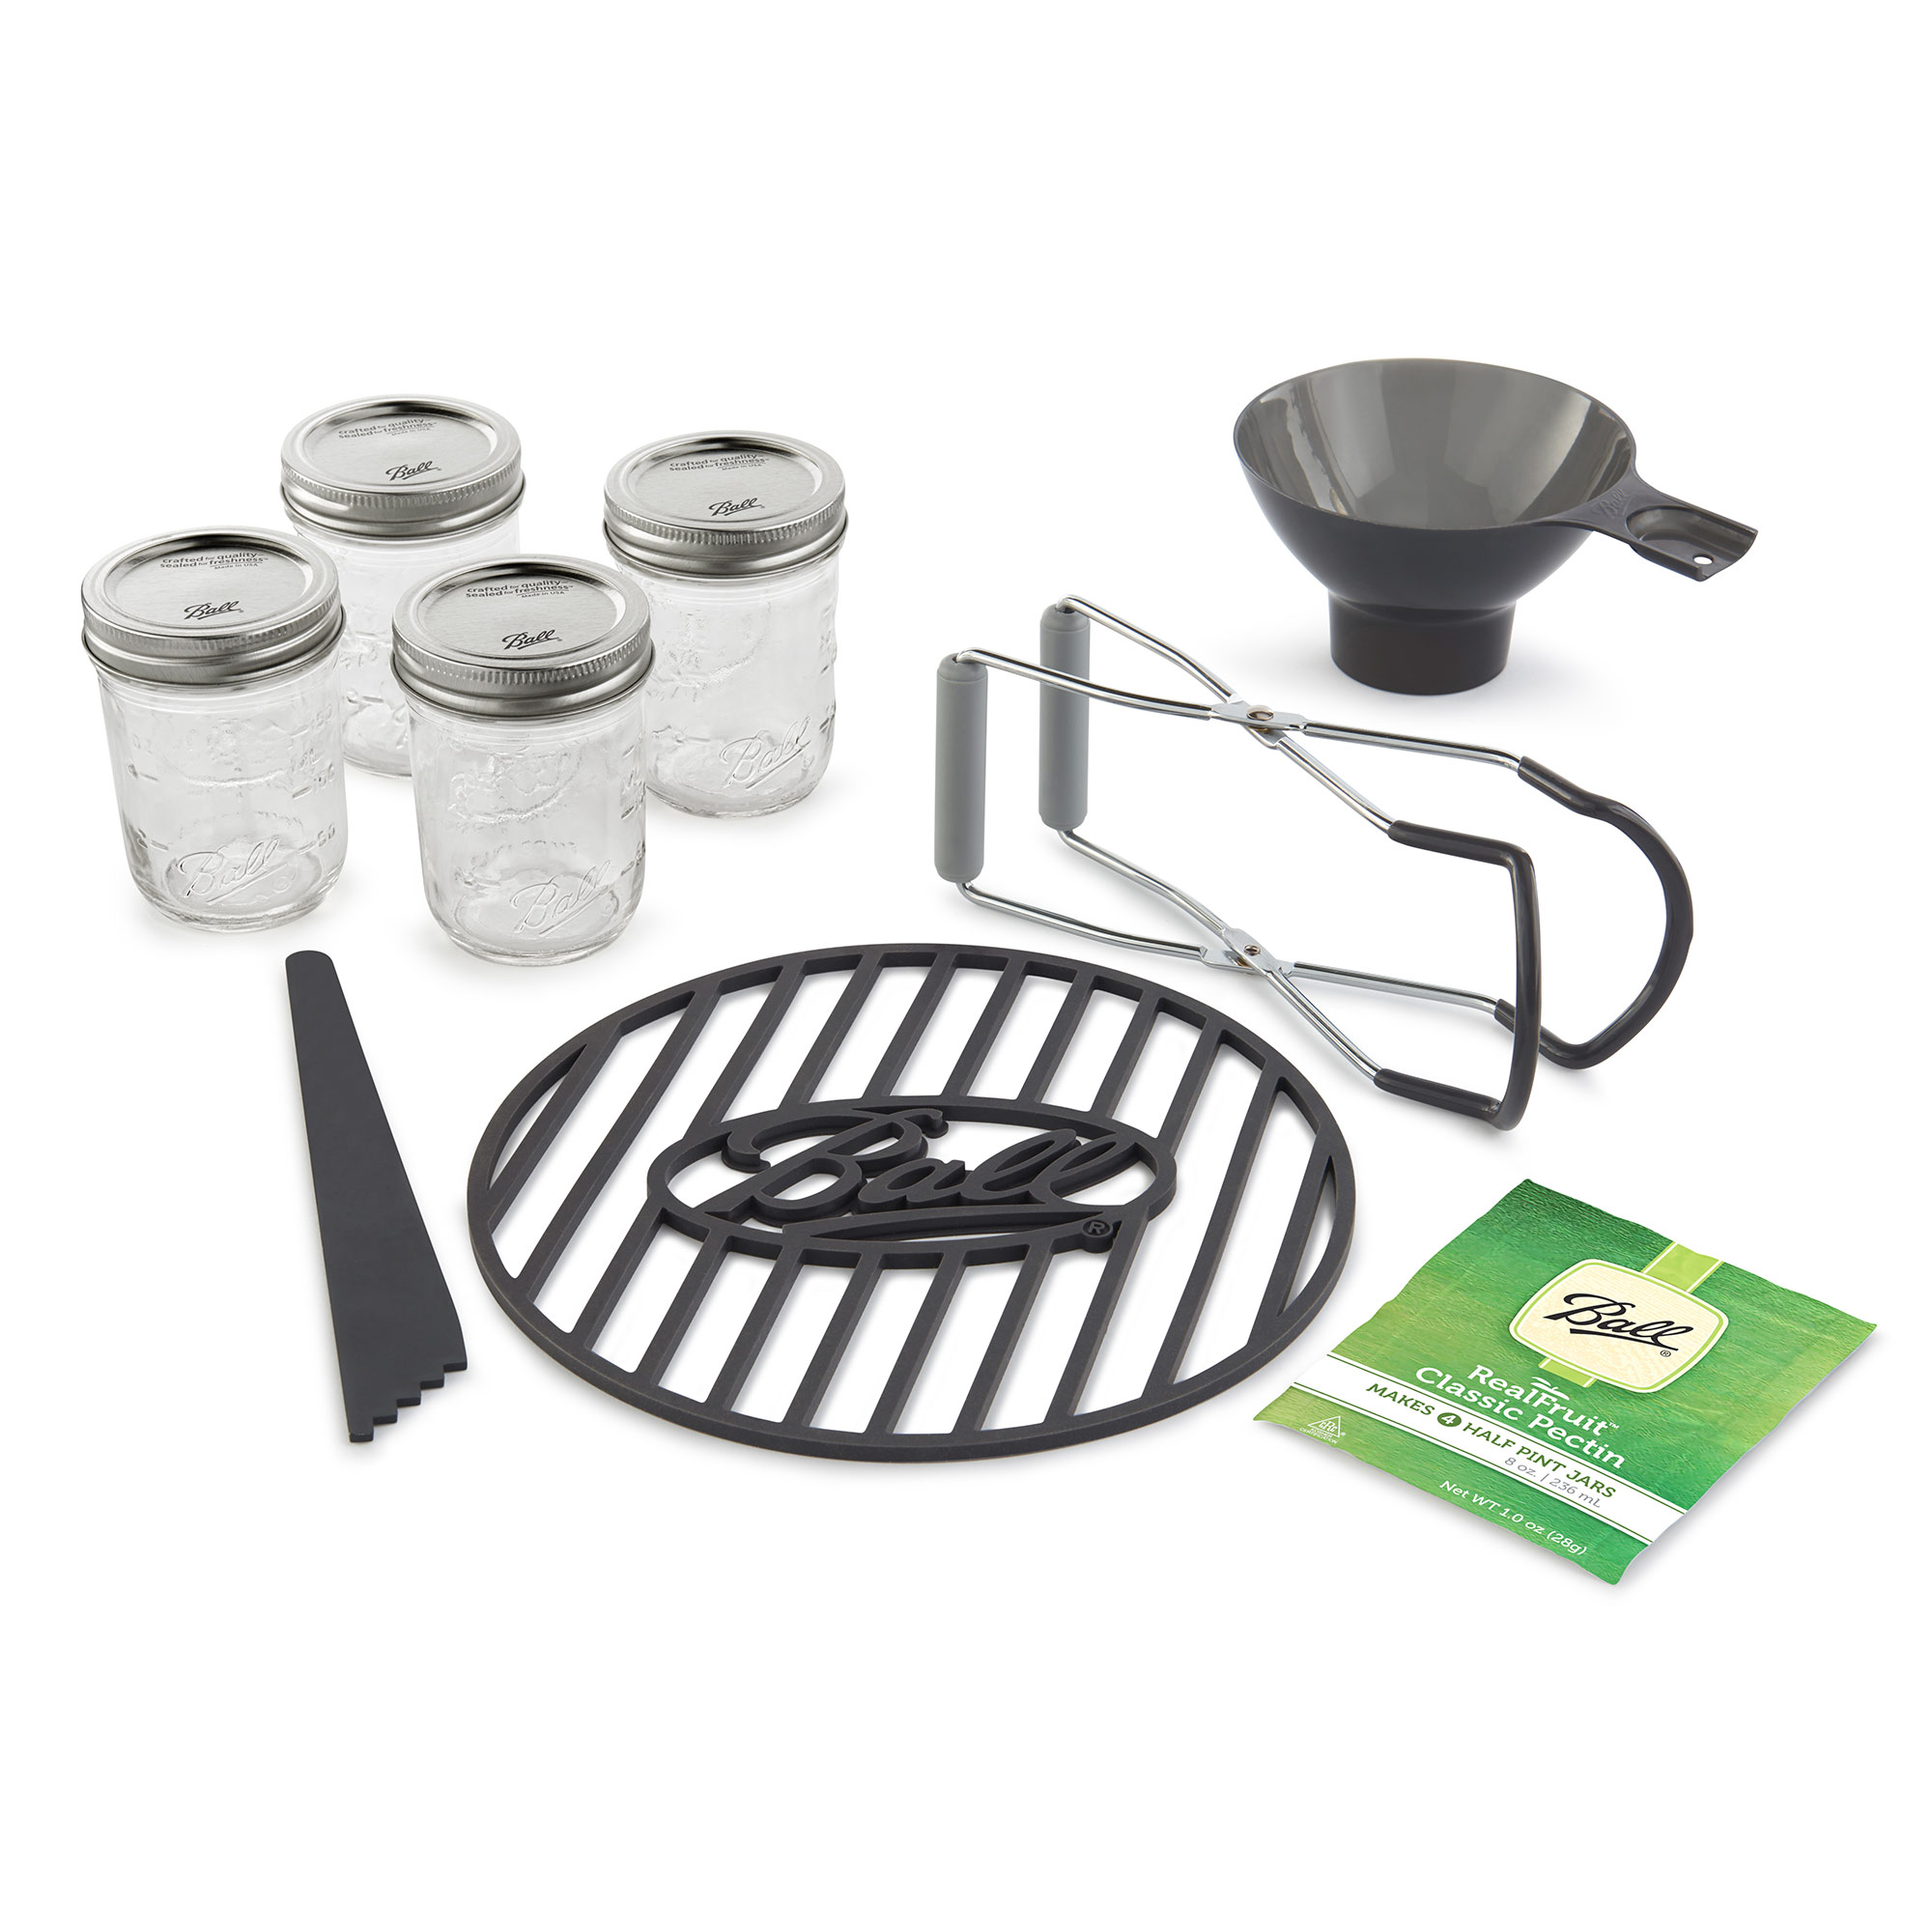 Ball 9 Piece Preserving Starter Kit for Canning - image 1 of 8